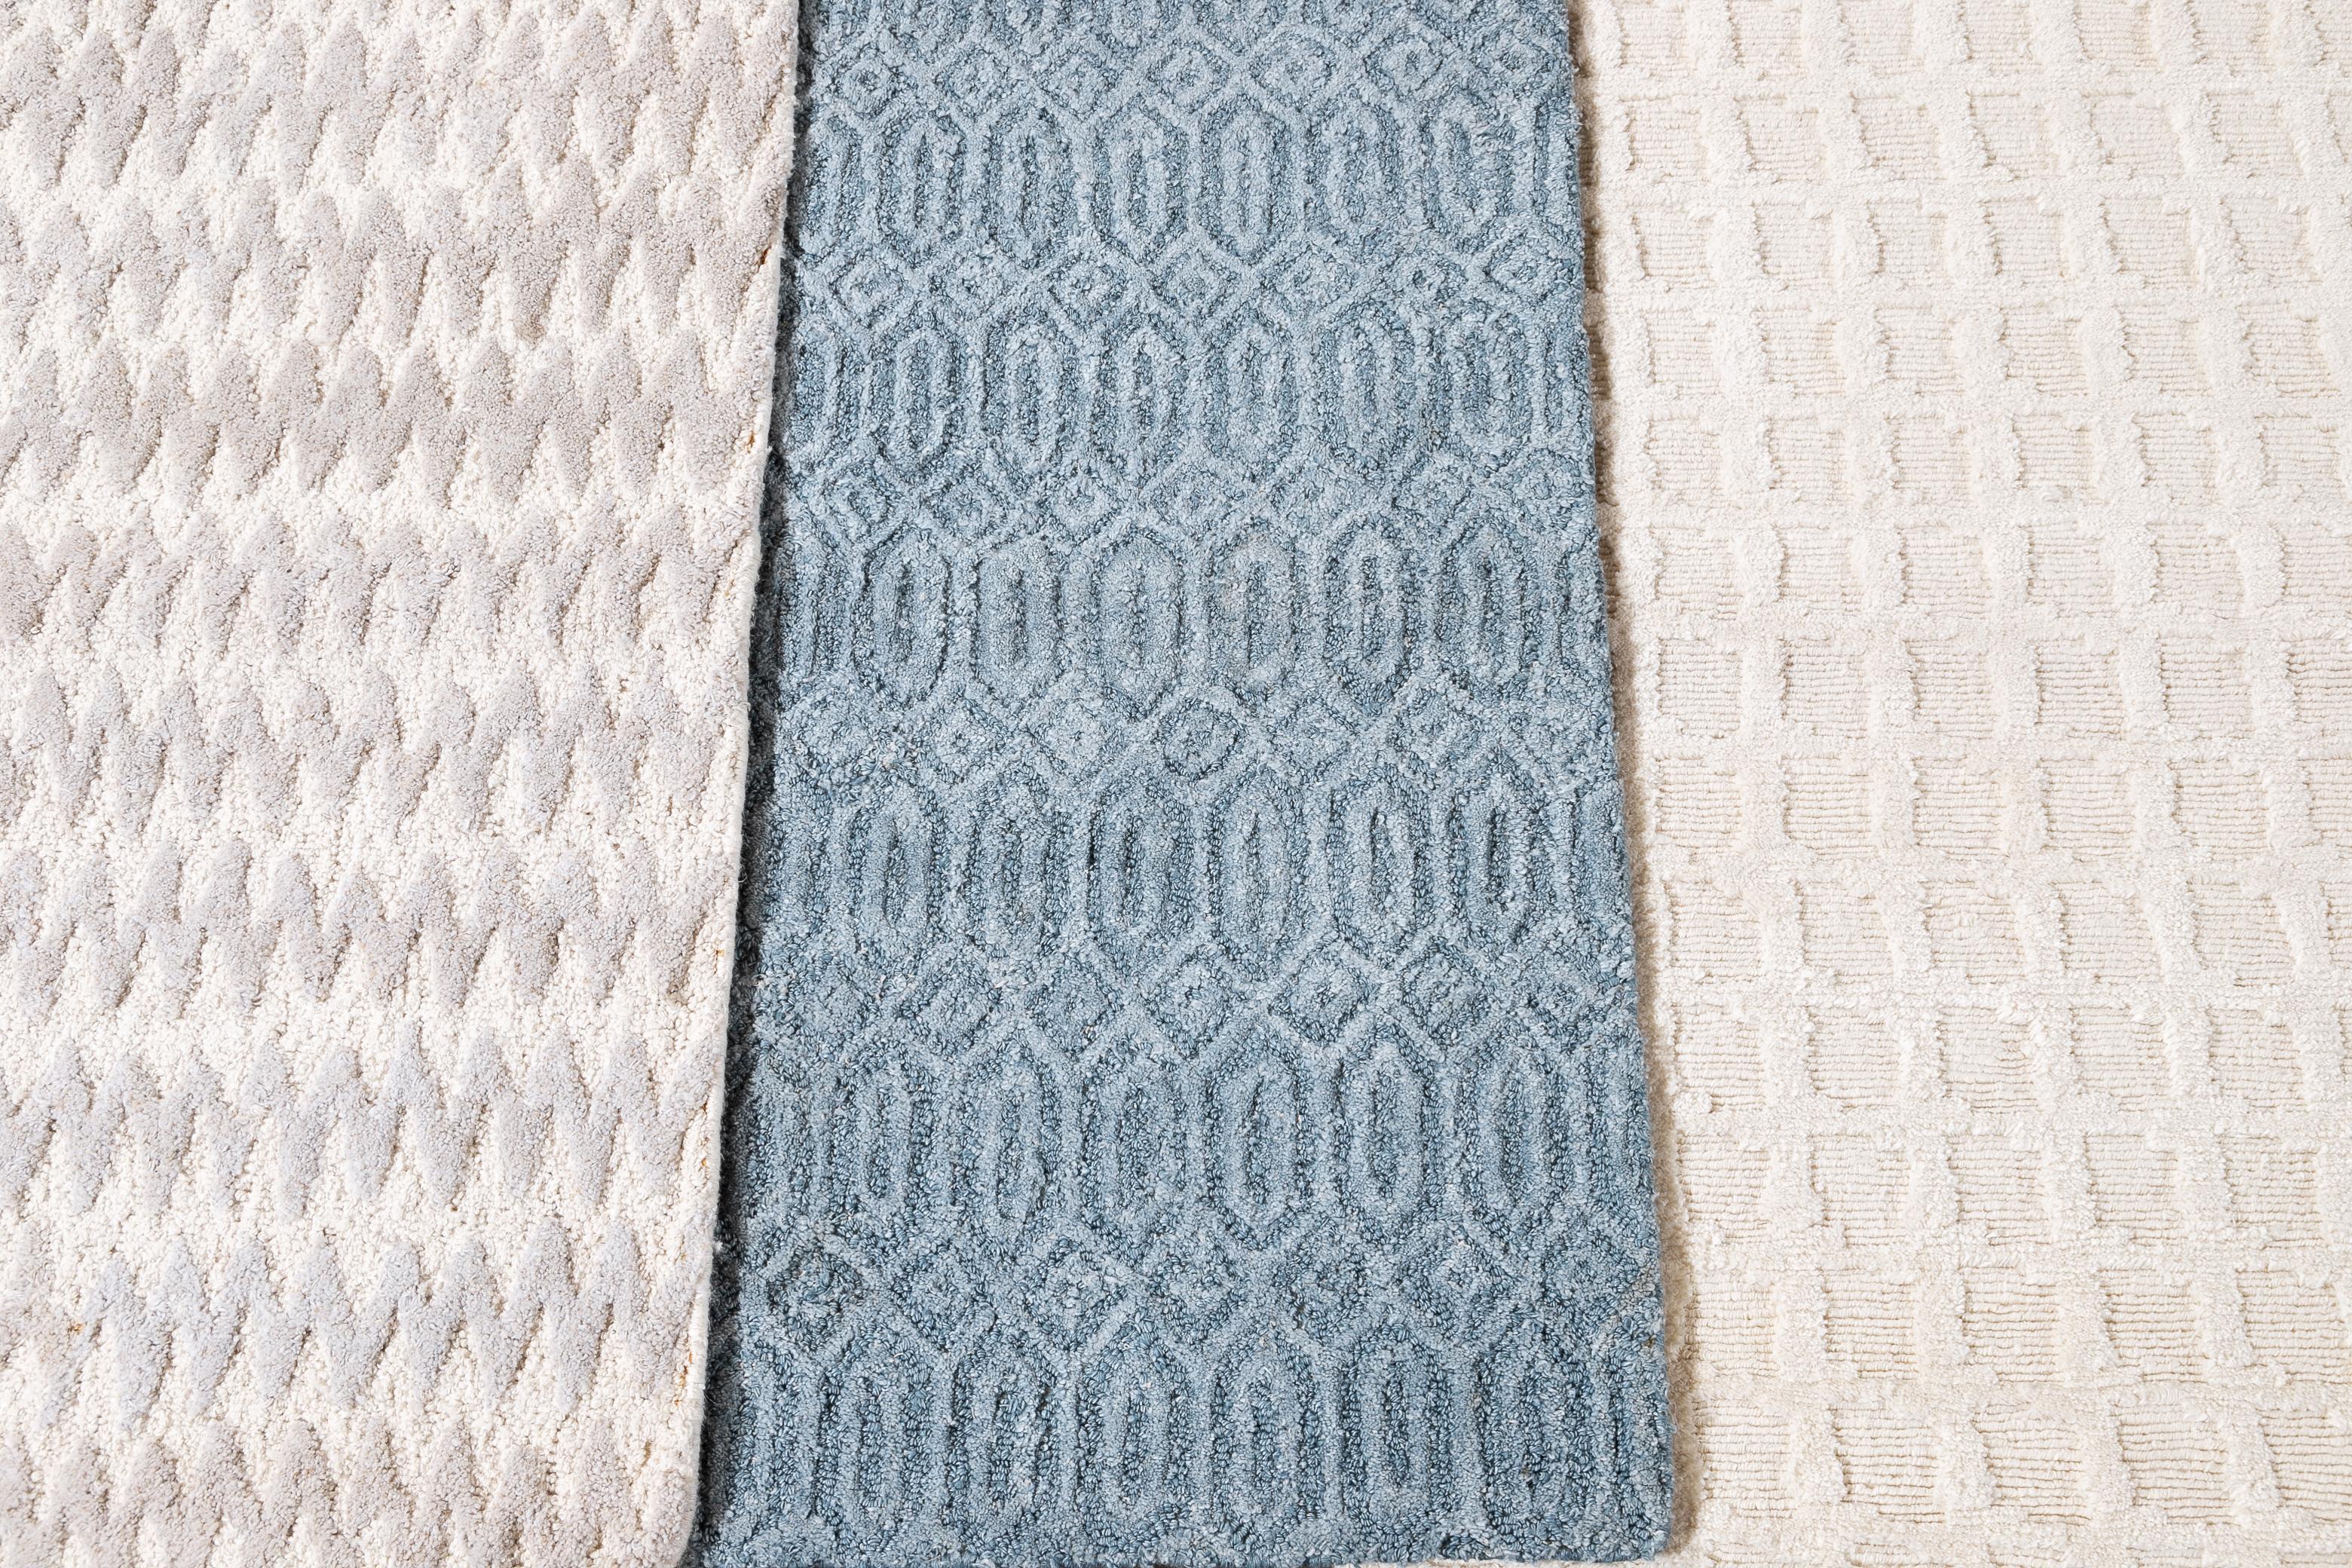 Solid-colored wool textured custom rug. Custom sizes and colors made-to-order. 

Material: Wool 
Lead Time: Approx. 15-20 weeks Available 
Colors: As shown (Ivory, Blue); other custom colors and styles available 
Made in Tibet 
Price shown is